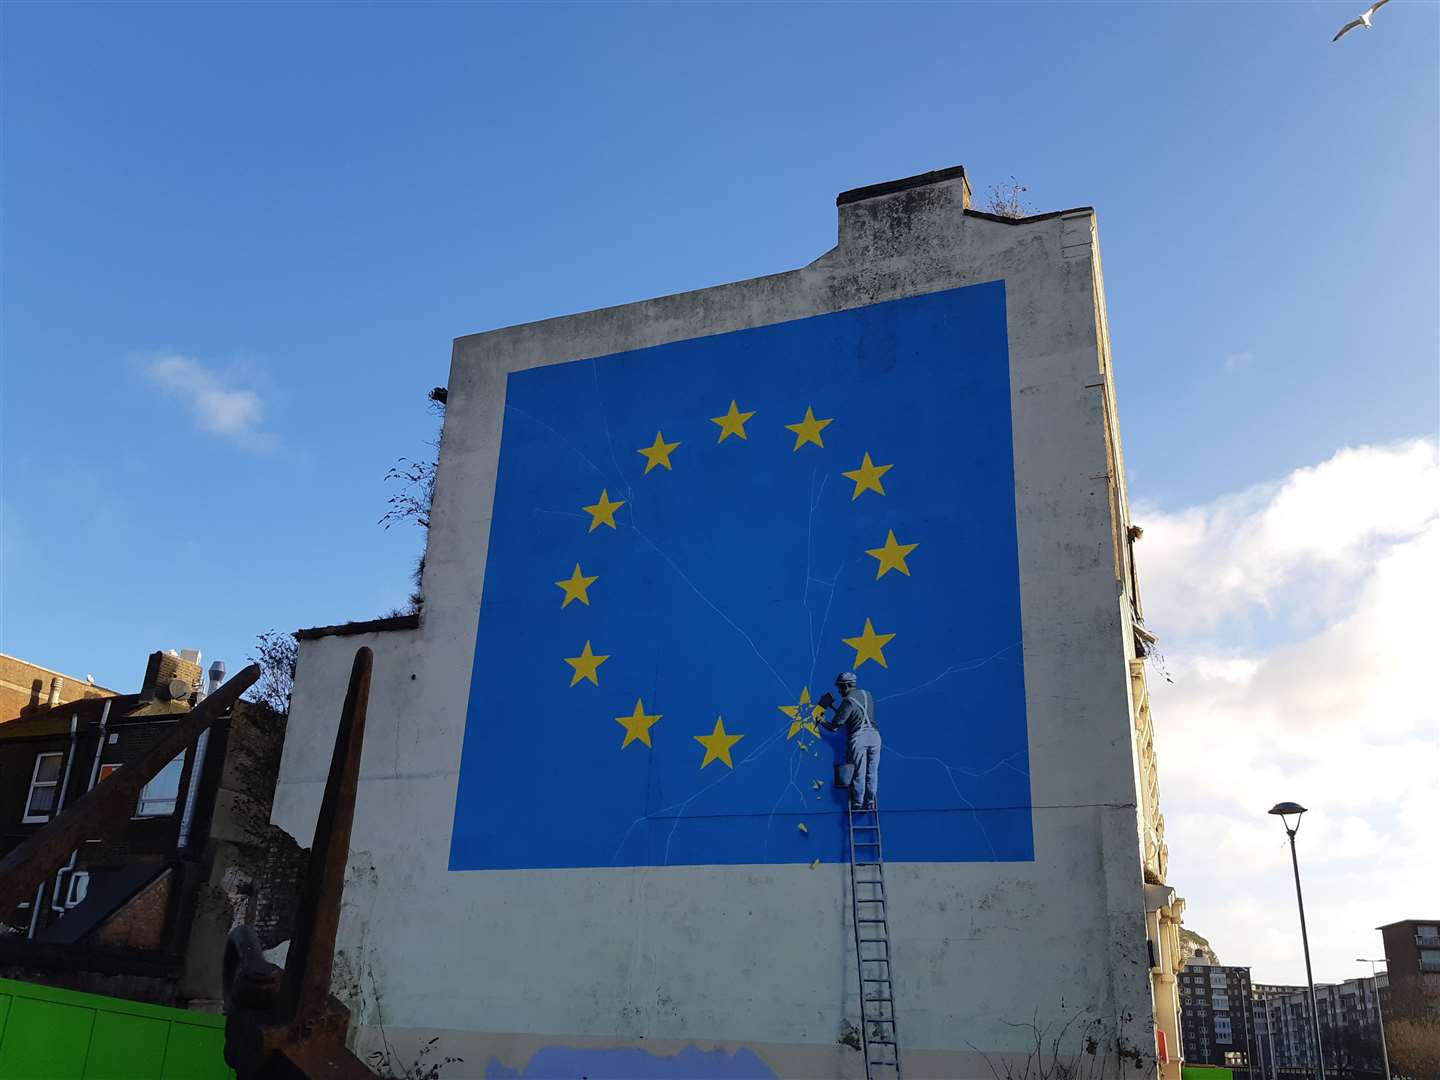 The EU-themed Banksy that stood - albeit briefly - in Dover